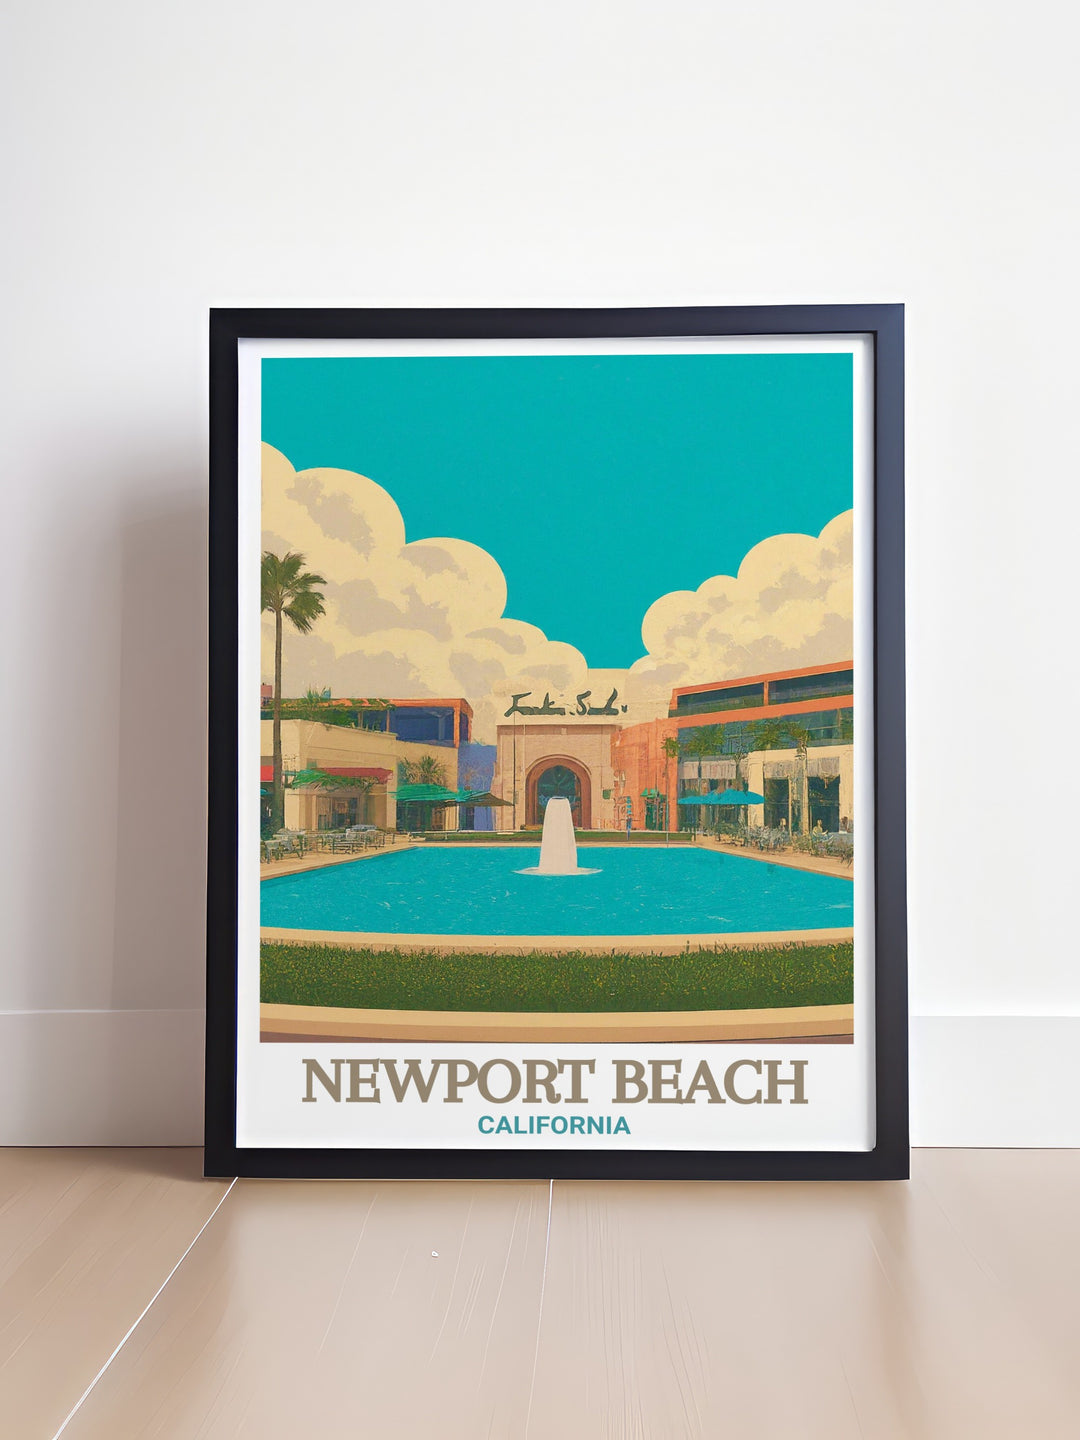 Stunning Fashion Island decor brings the beauty of Newport Beach to your home. This artwork adds a touch of coastal elegance and warmth to any space, making it a perfect addition to contemporary or traditional interiors. Celebrate Californias coastal charm.